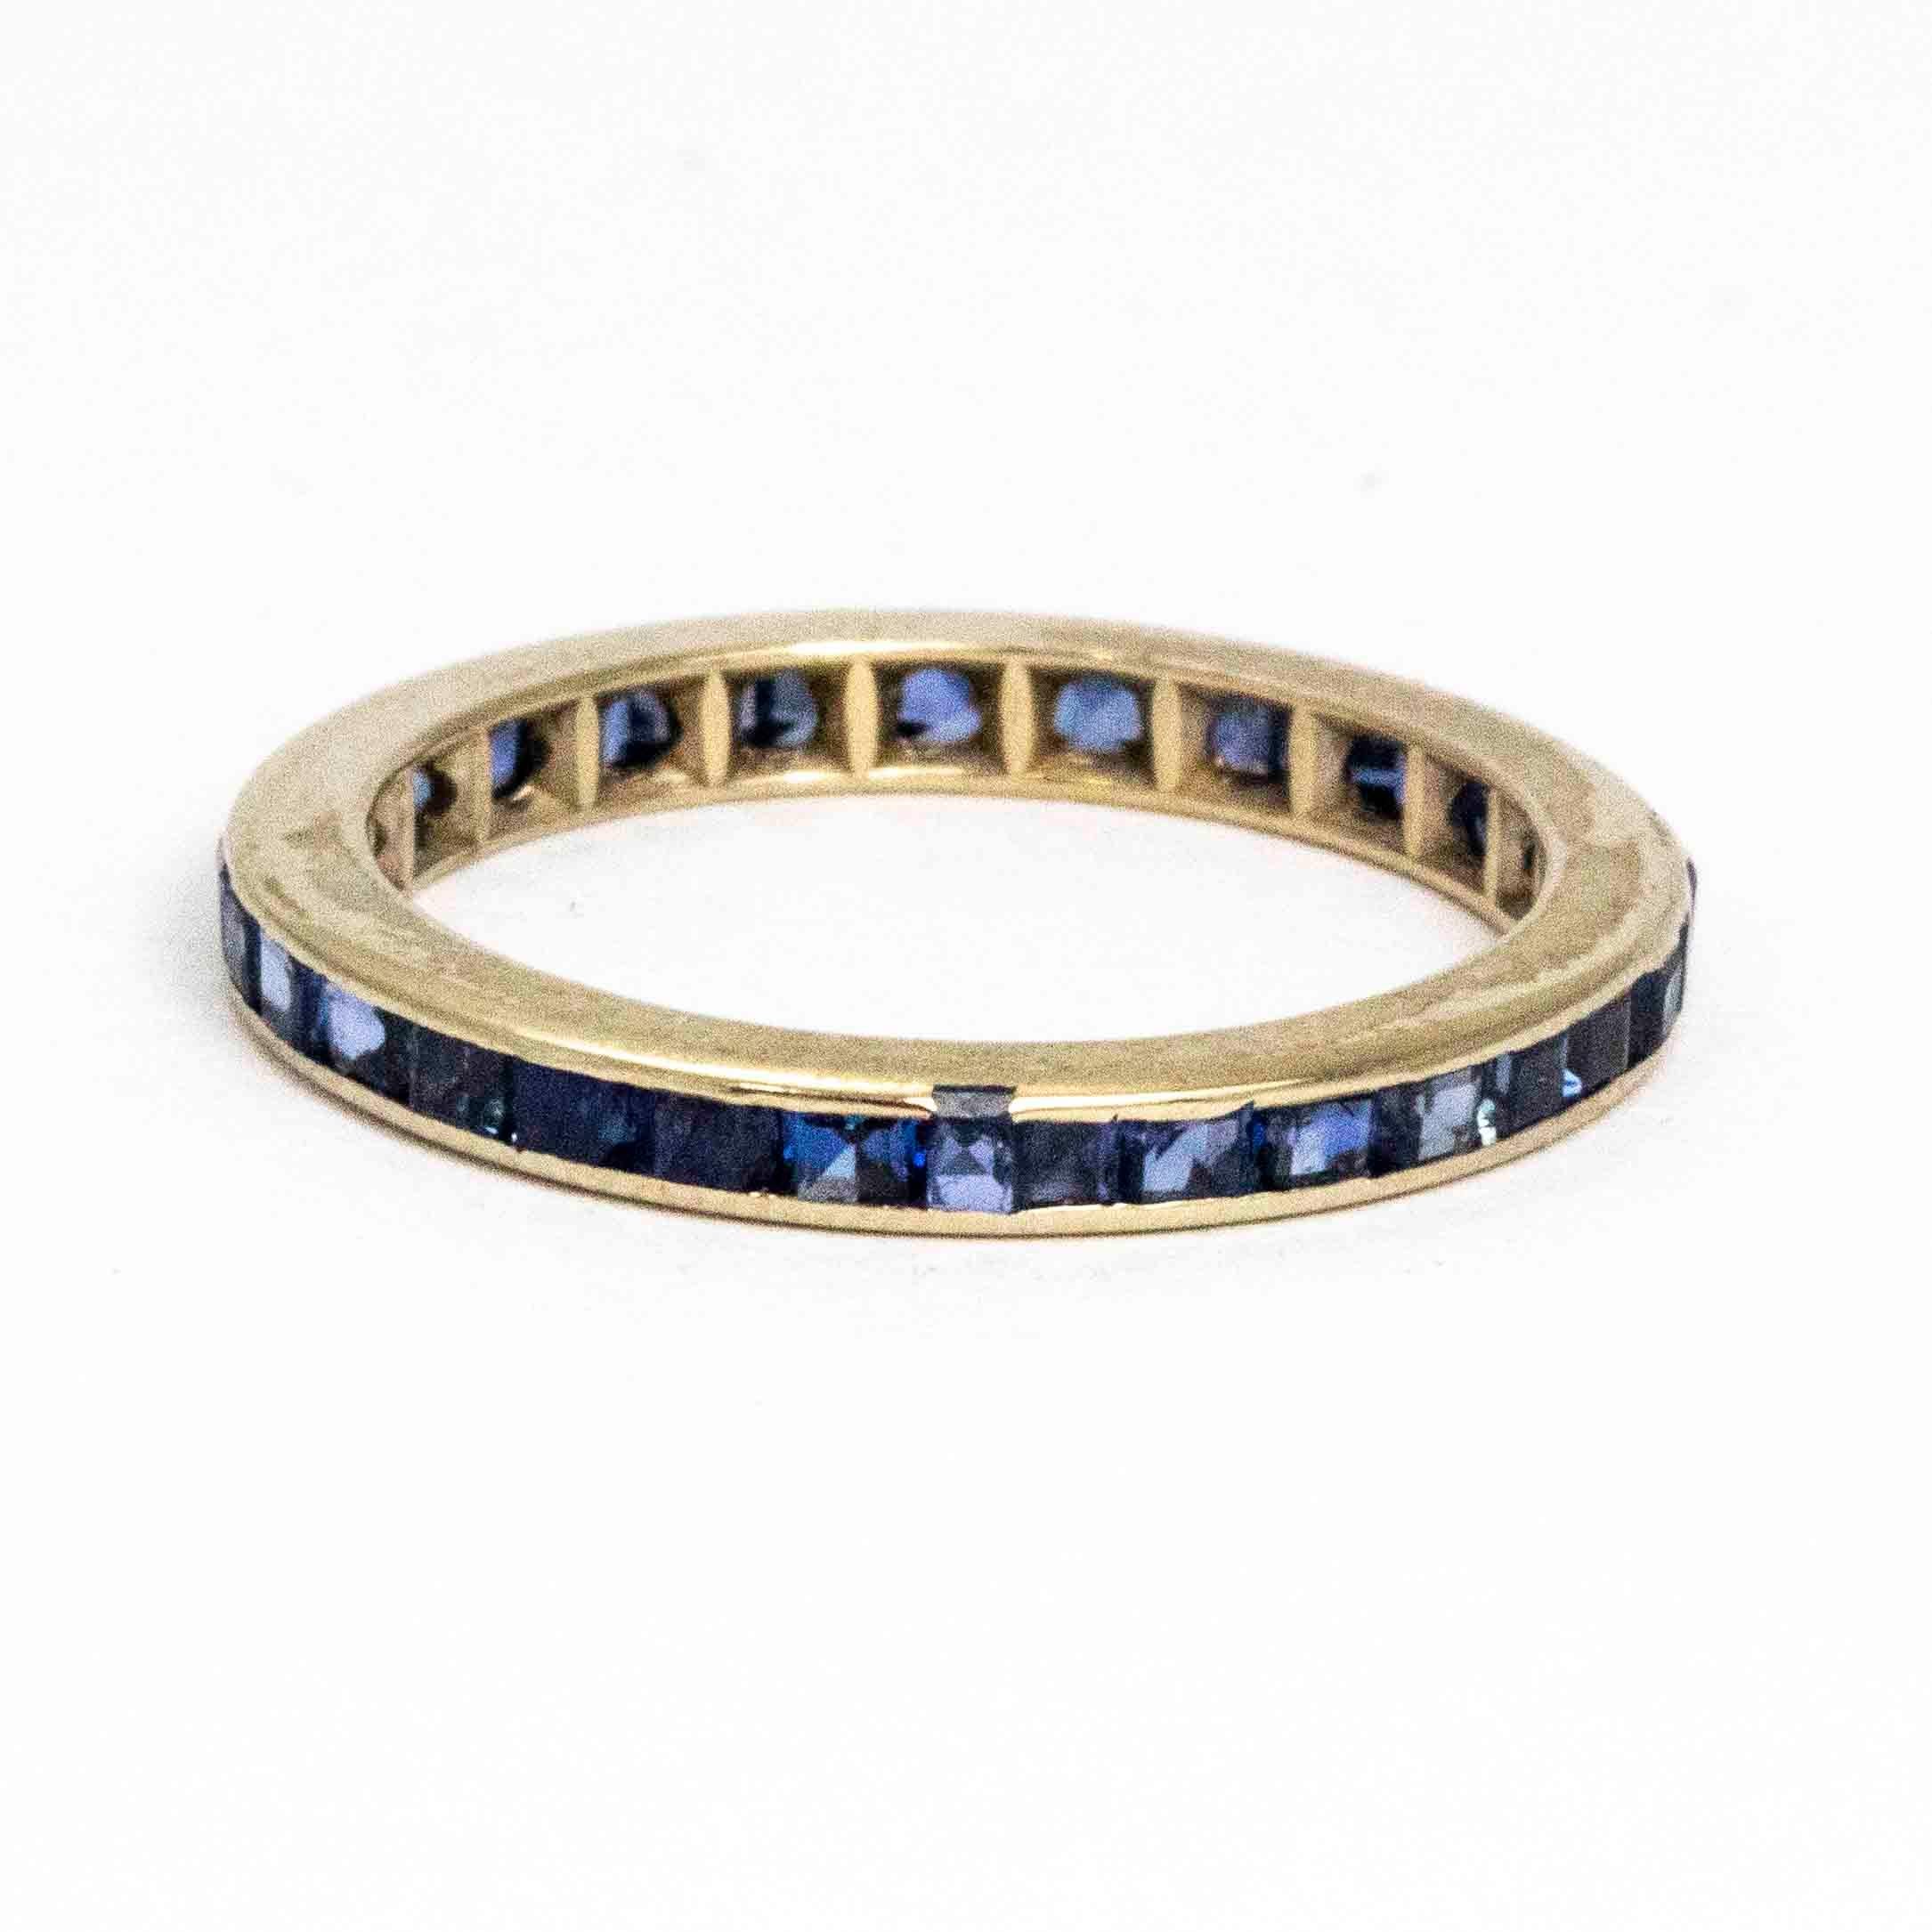 This gorgeous platinum eternity ring encases gorgeous deep blue sapphires all the way around it. The stones measure approximately 5pts each. These full eternity bands work brilliantly as a stack or equally as beautiful worn alone. 

Size J 1/2 or 5